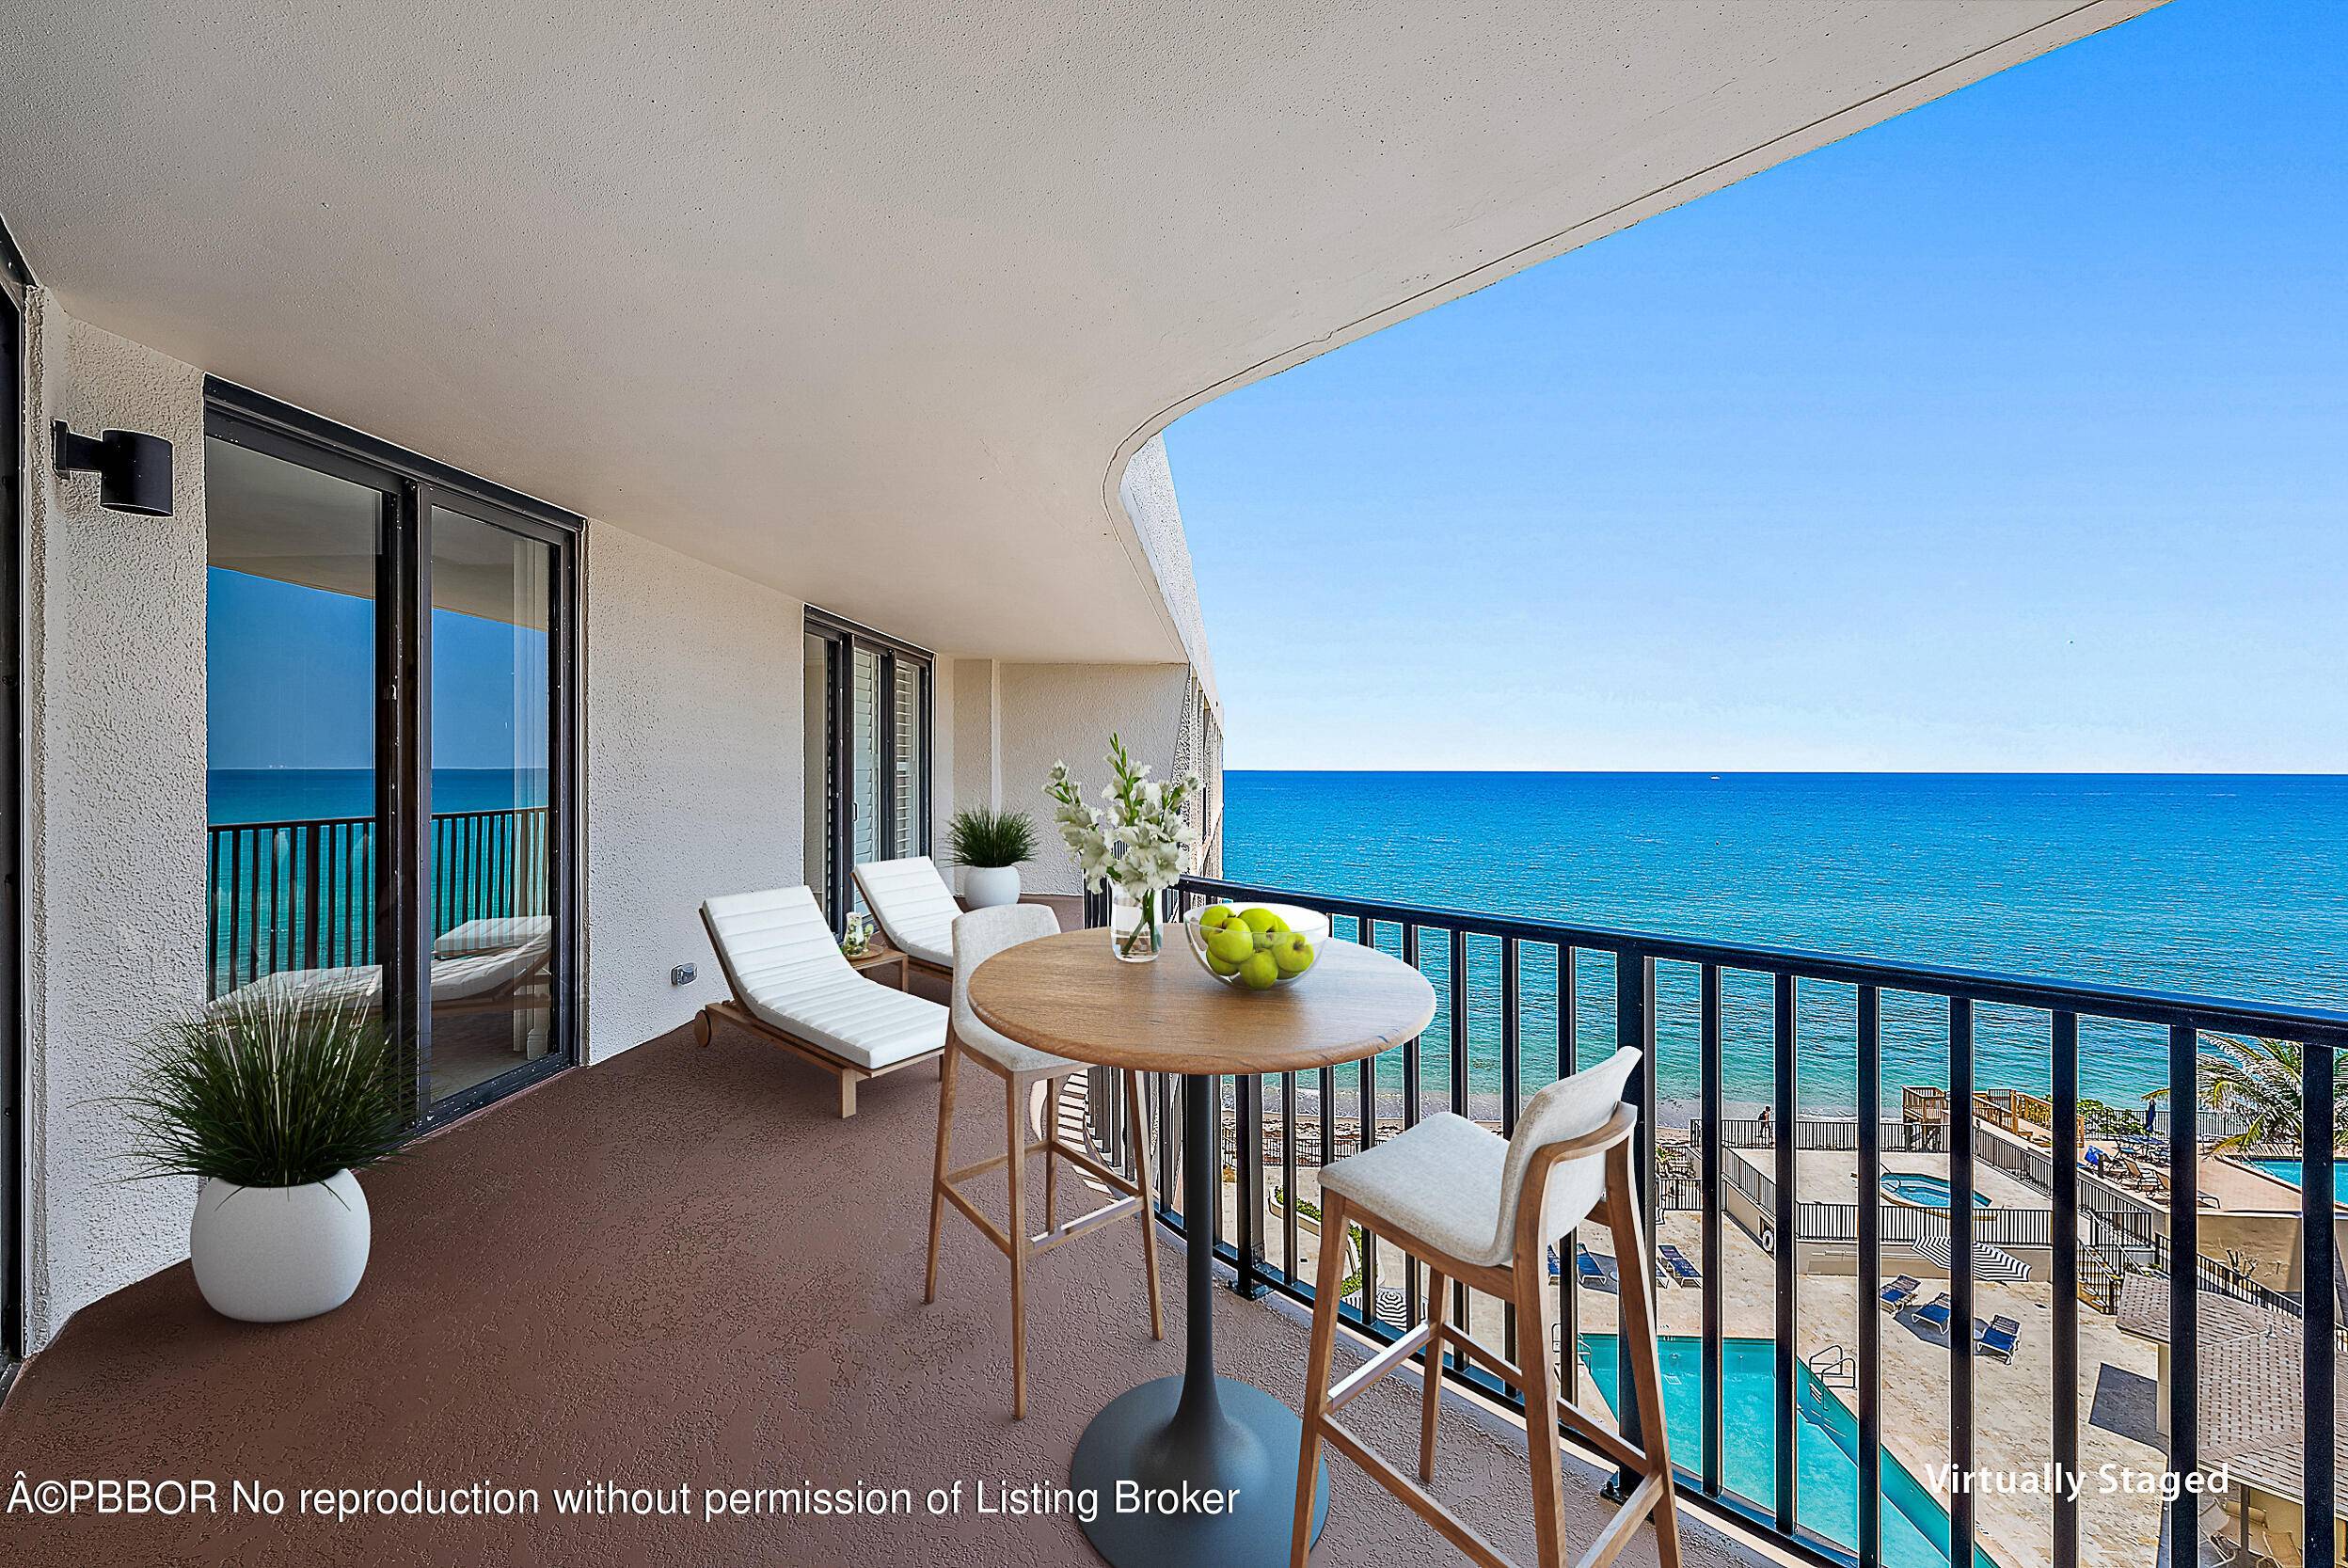 Experience the pinnacle of oceanfront living in our exclusive penthouse condo, graced with elegant skylights that bathe the interior in natural light.